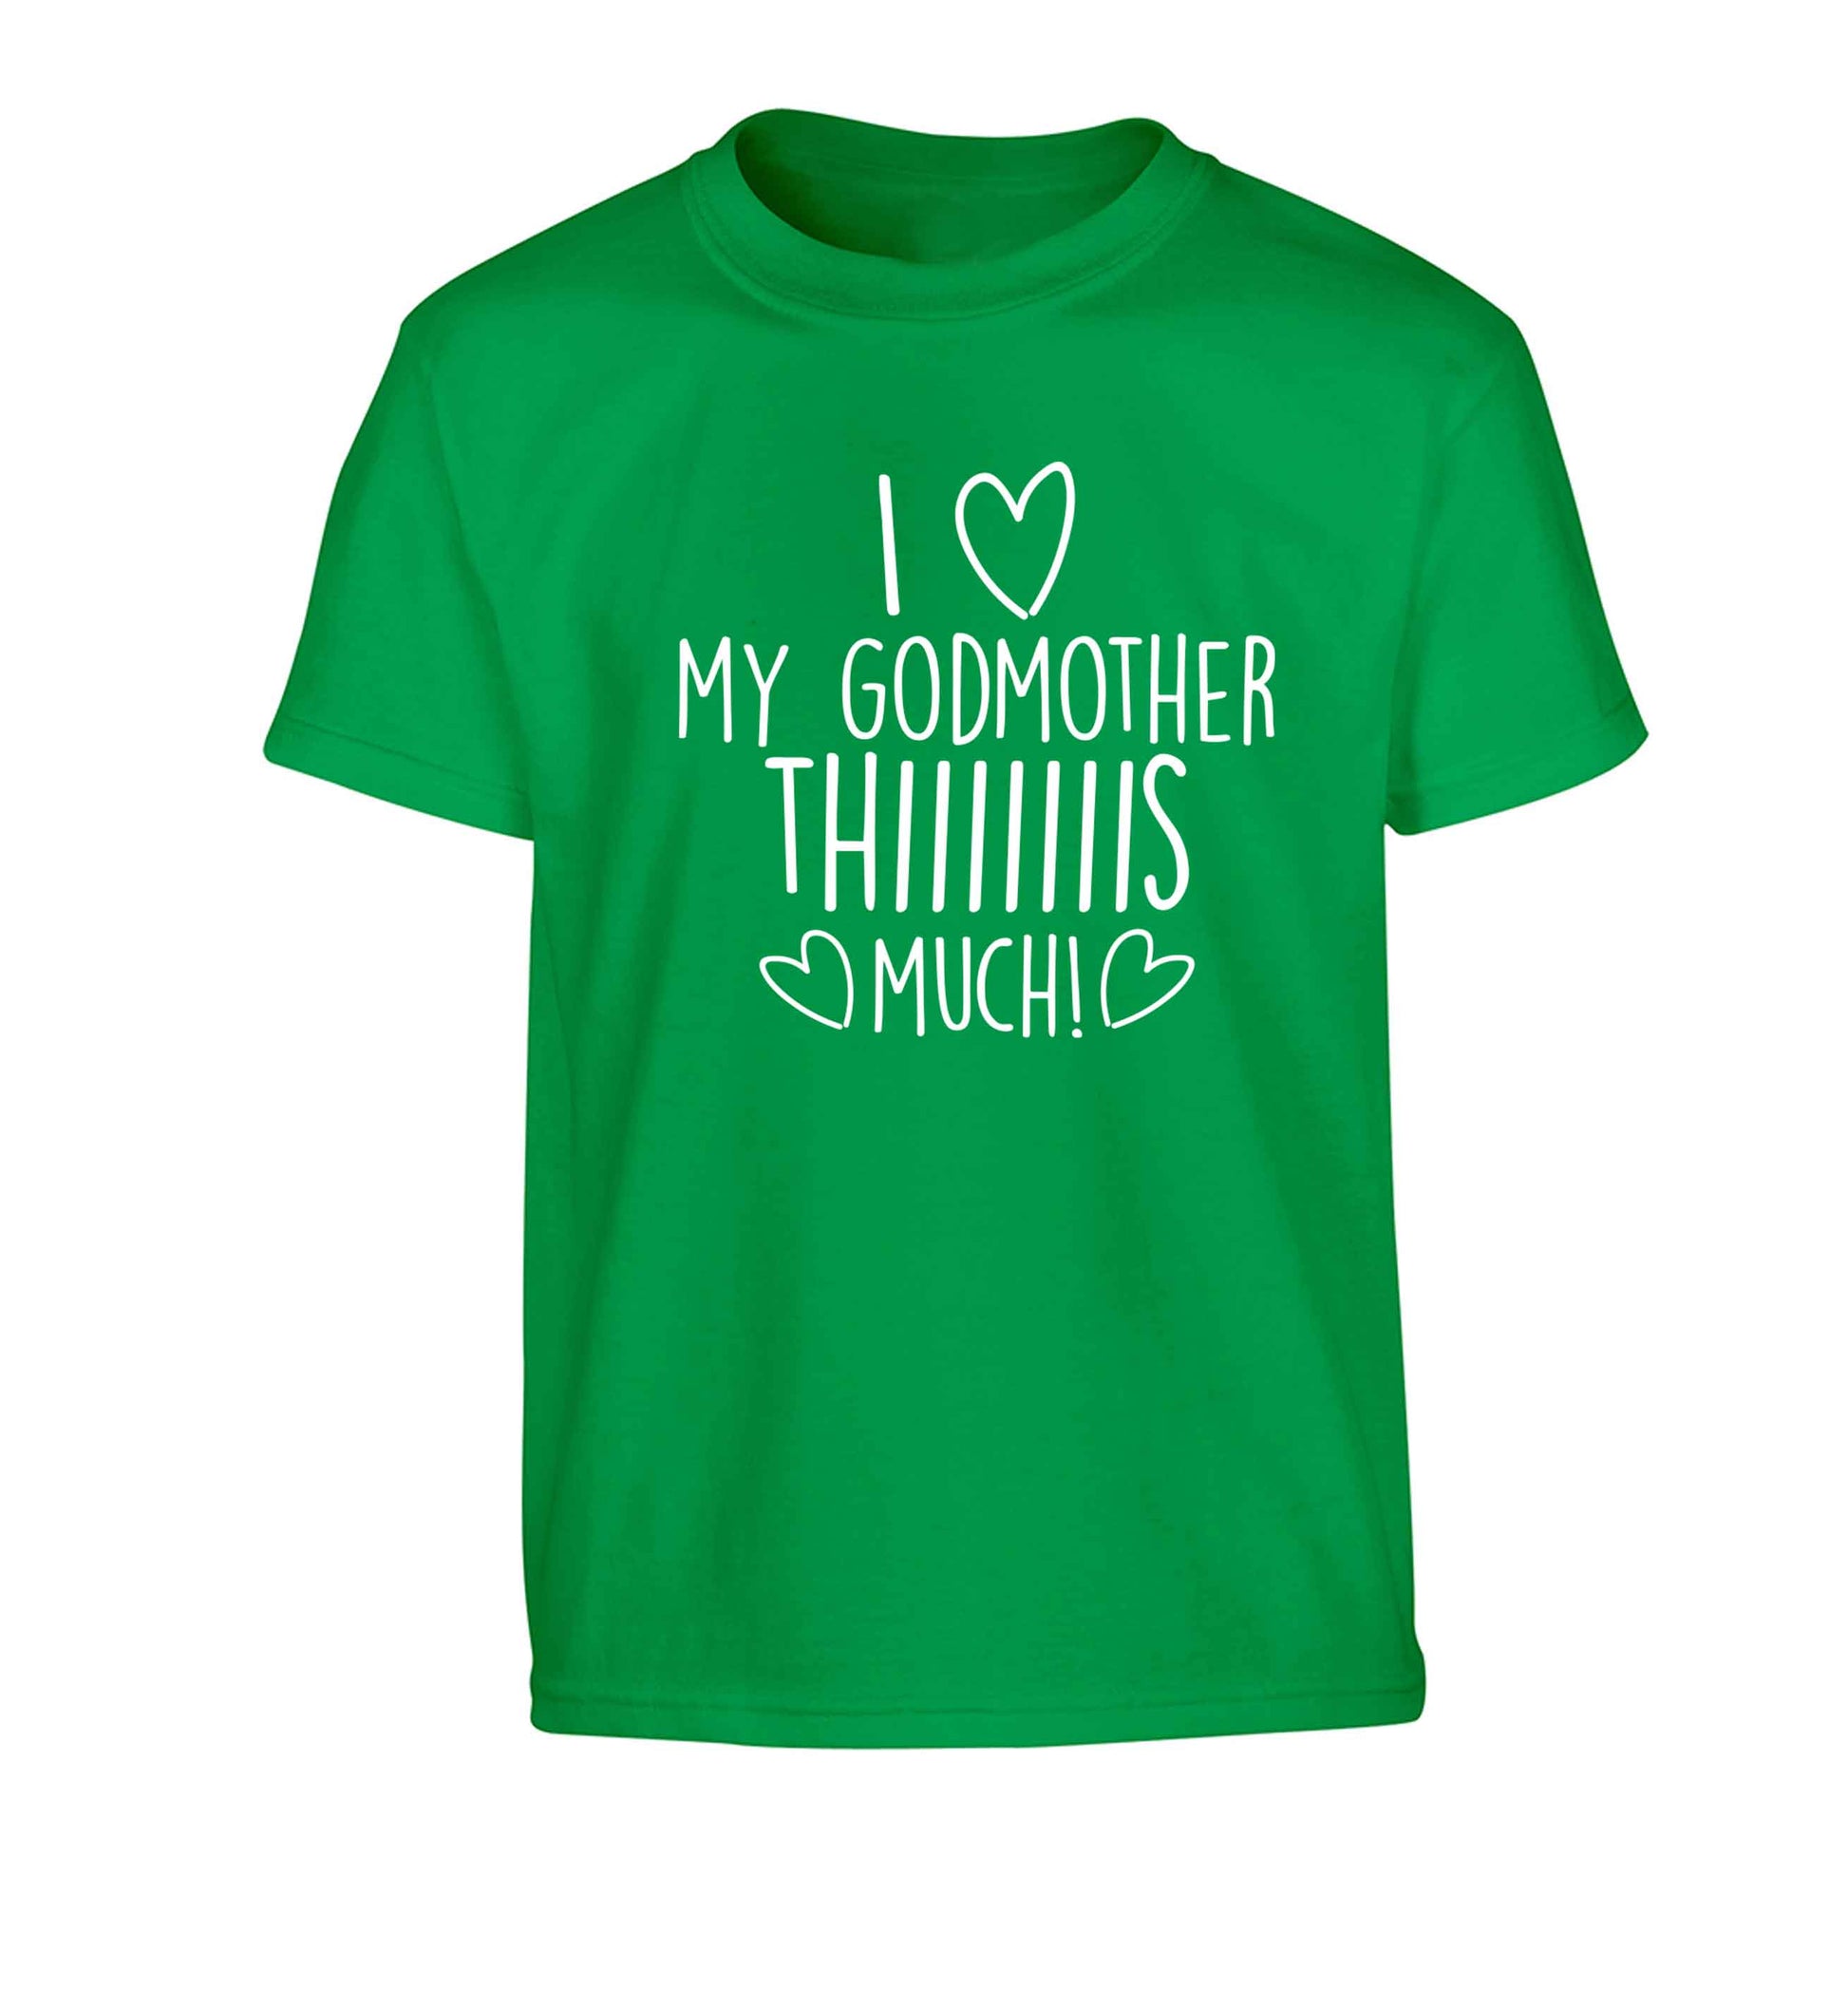 I love my Godmother this much Children's green Tshirt 12-13 Years